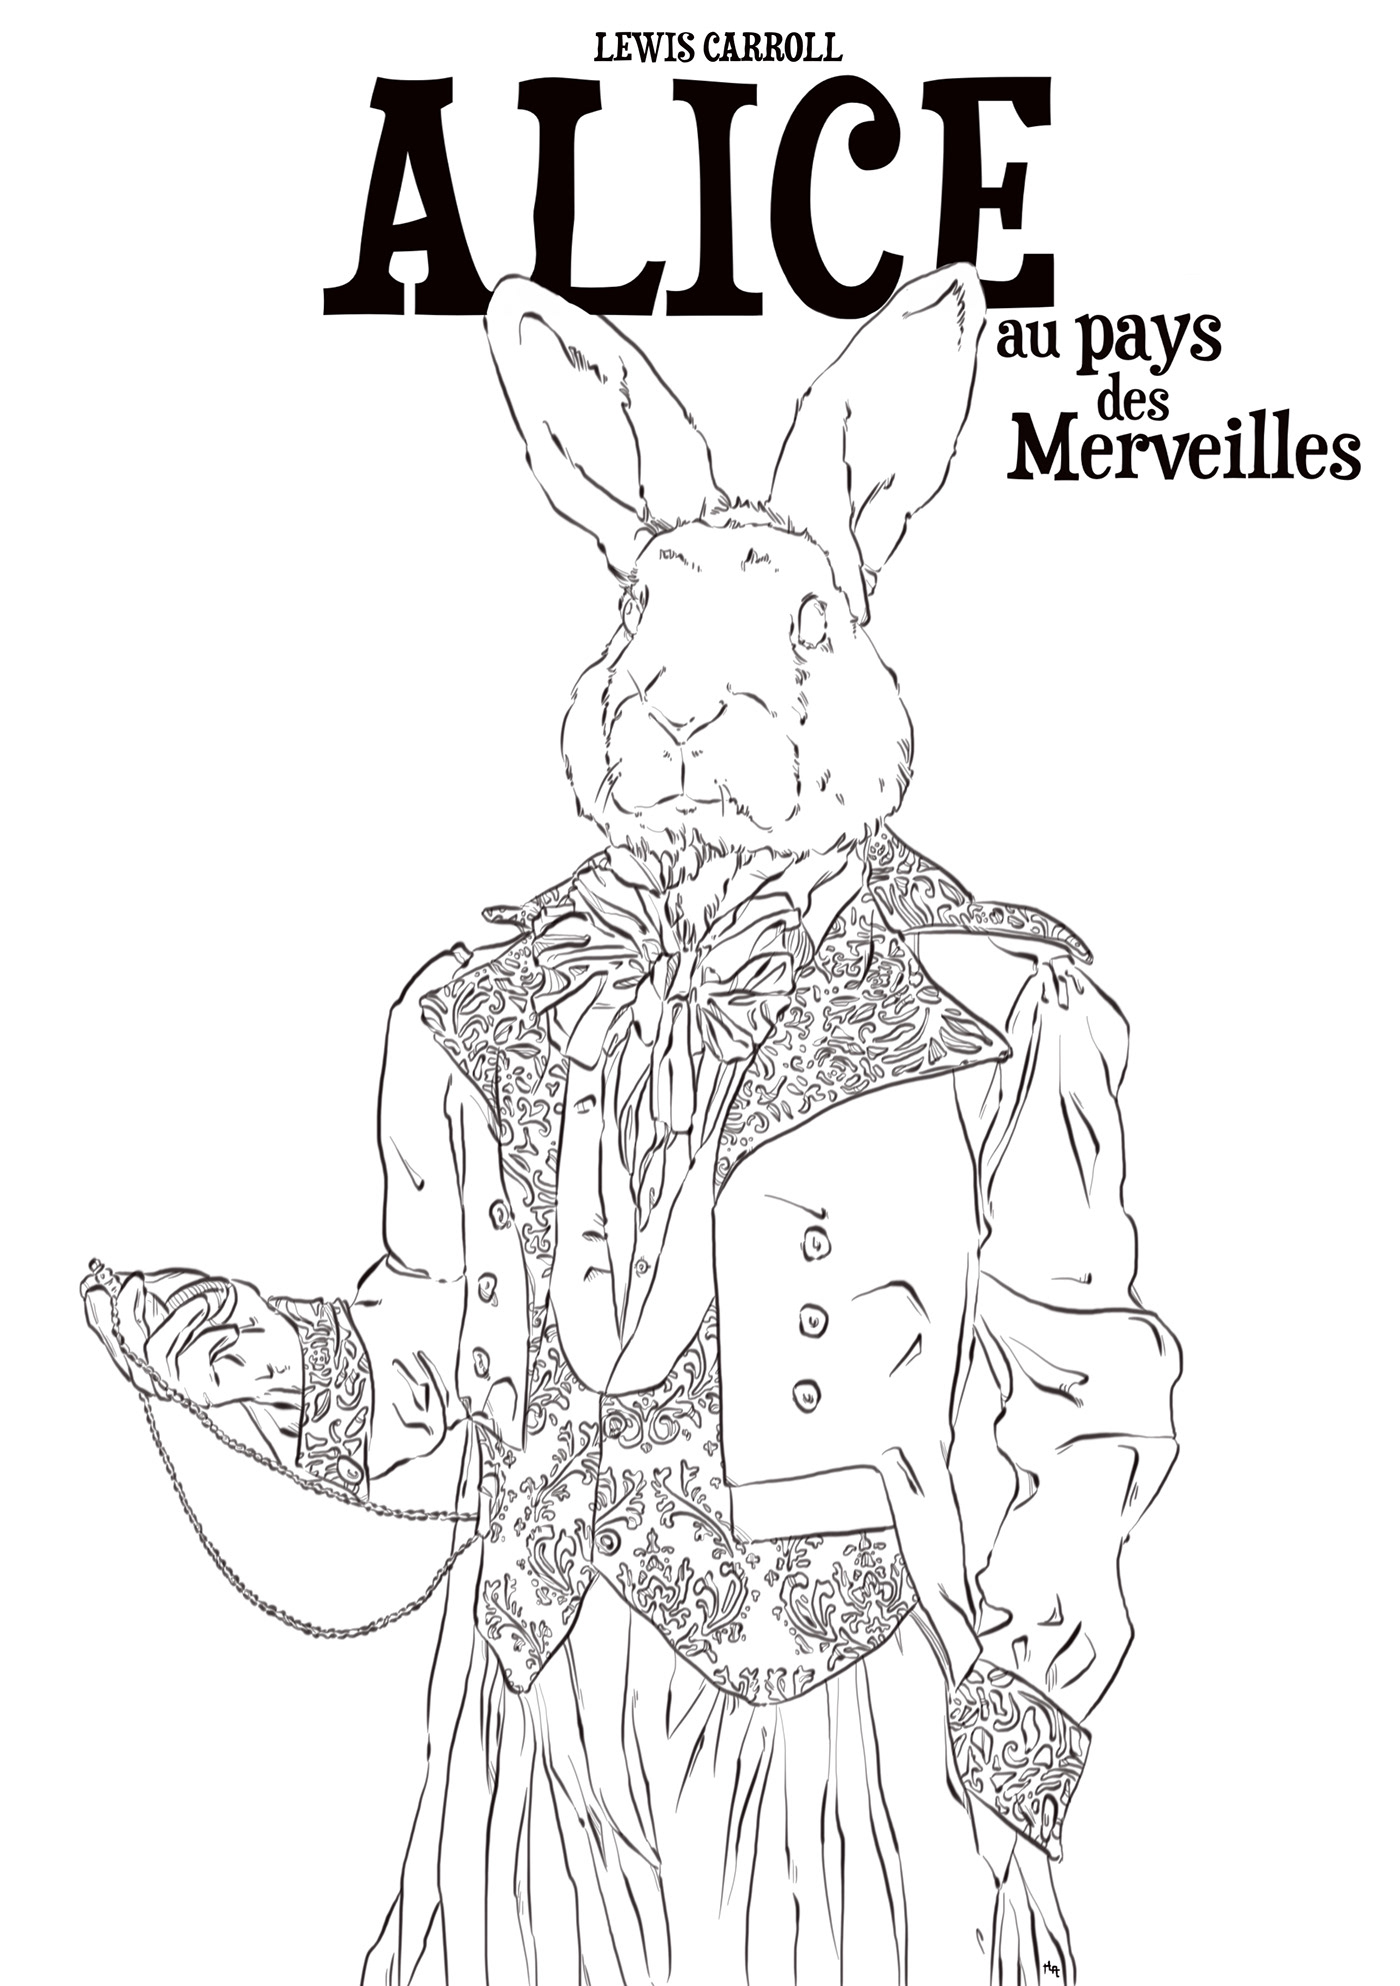 alice in wonderland rabbit bunny book cover book lewis carroll animal Mode Fashion  pattern